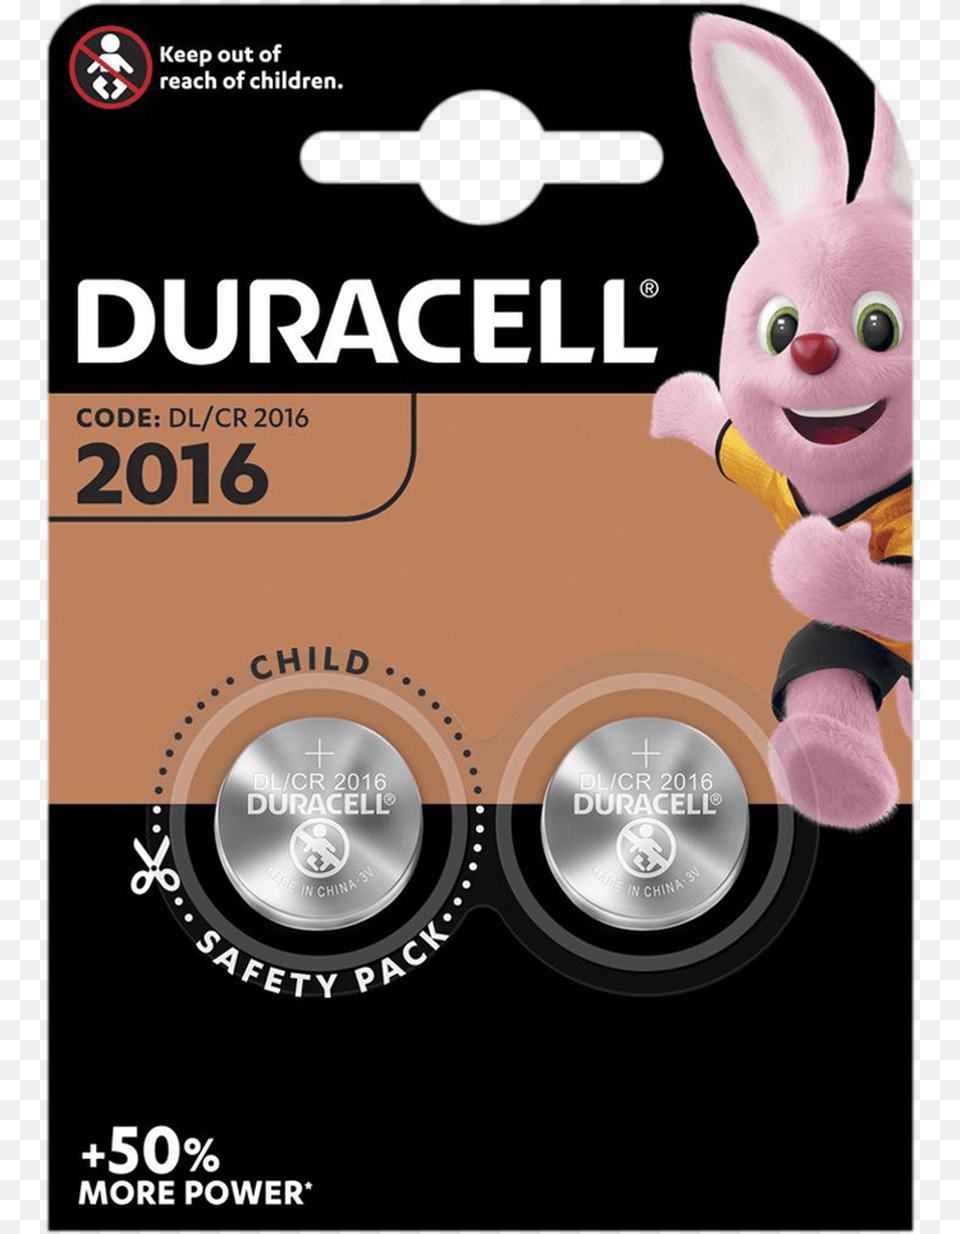 Duracell, Advertisement, Poster, Toy Png